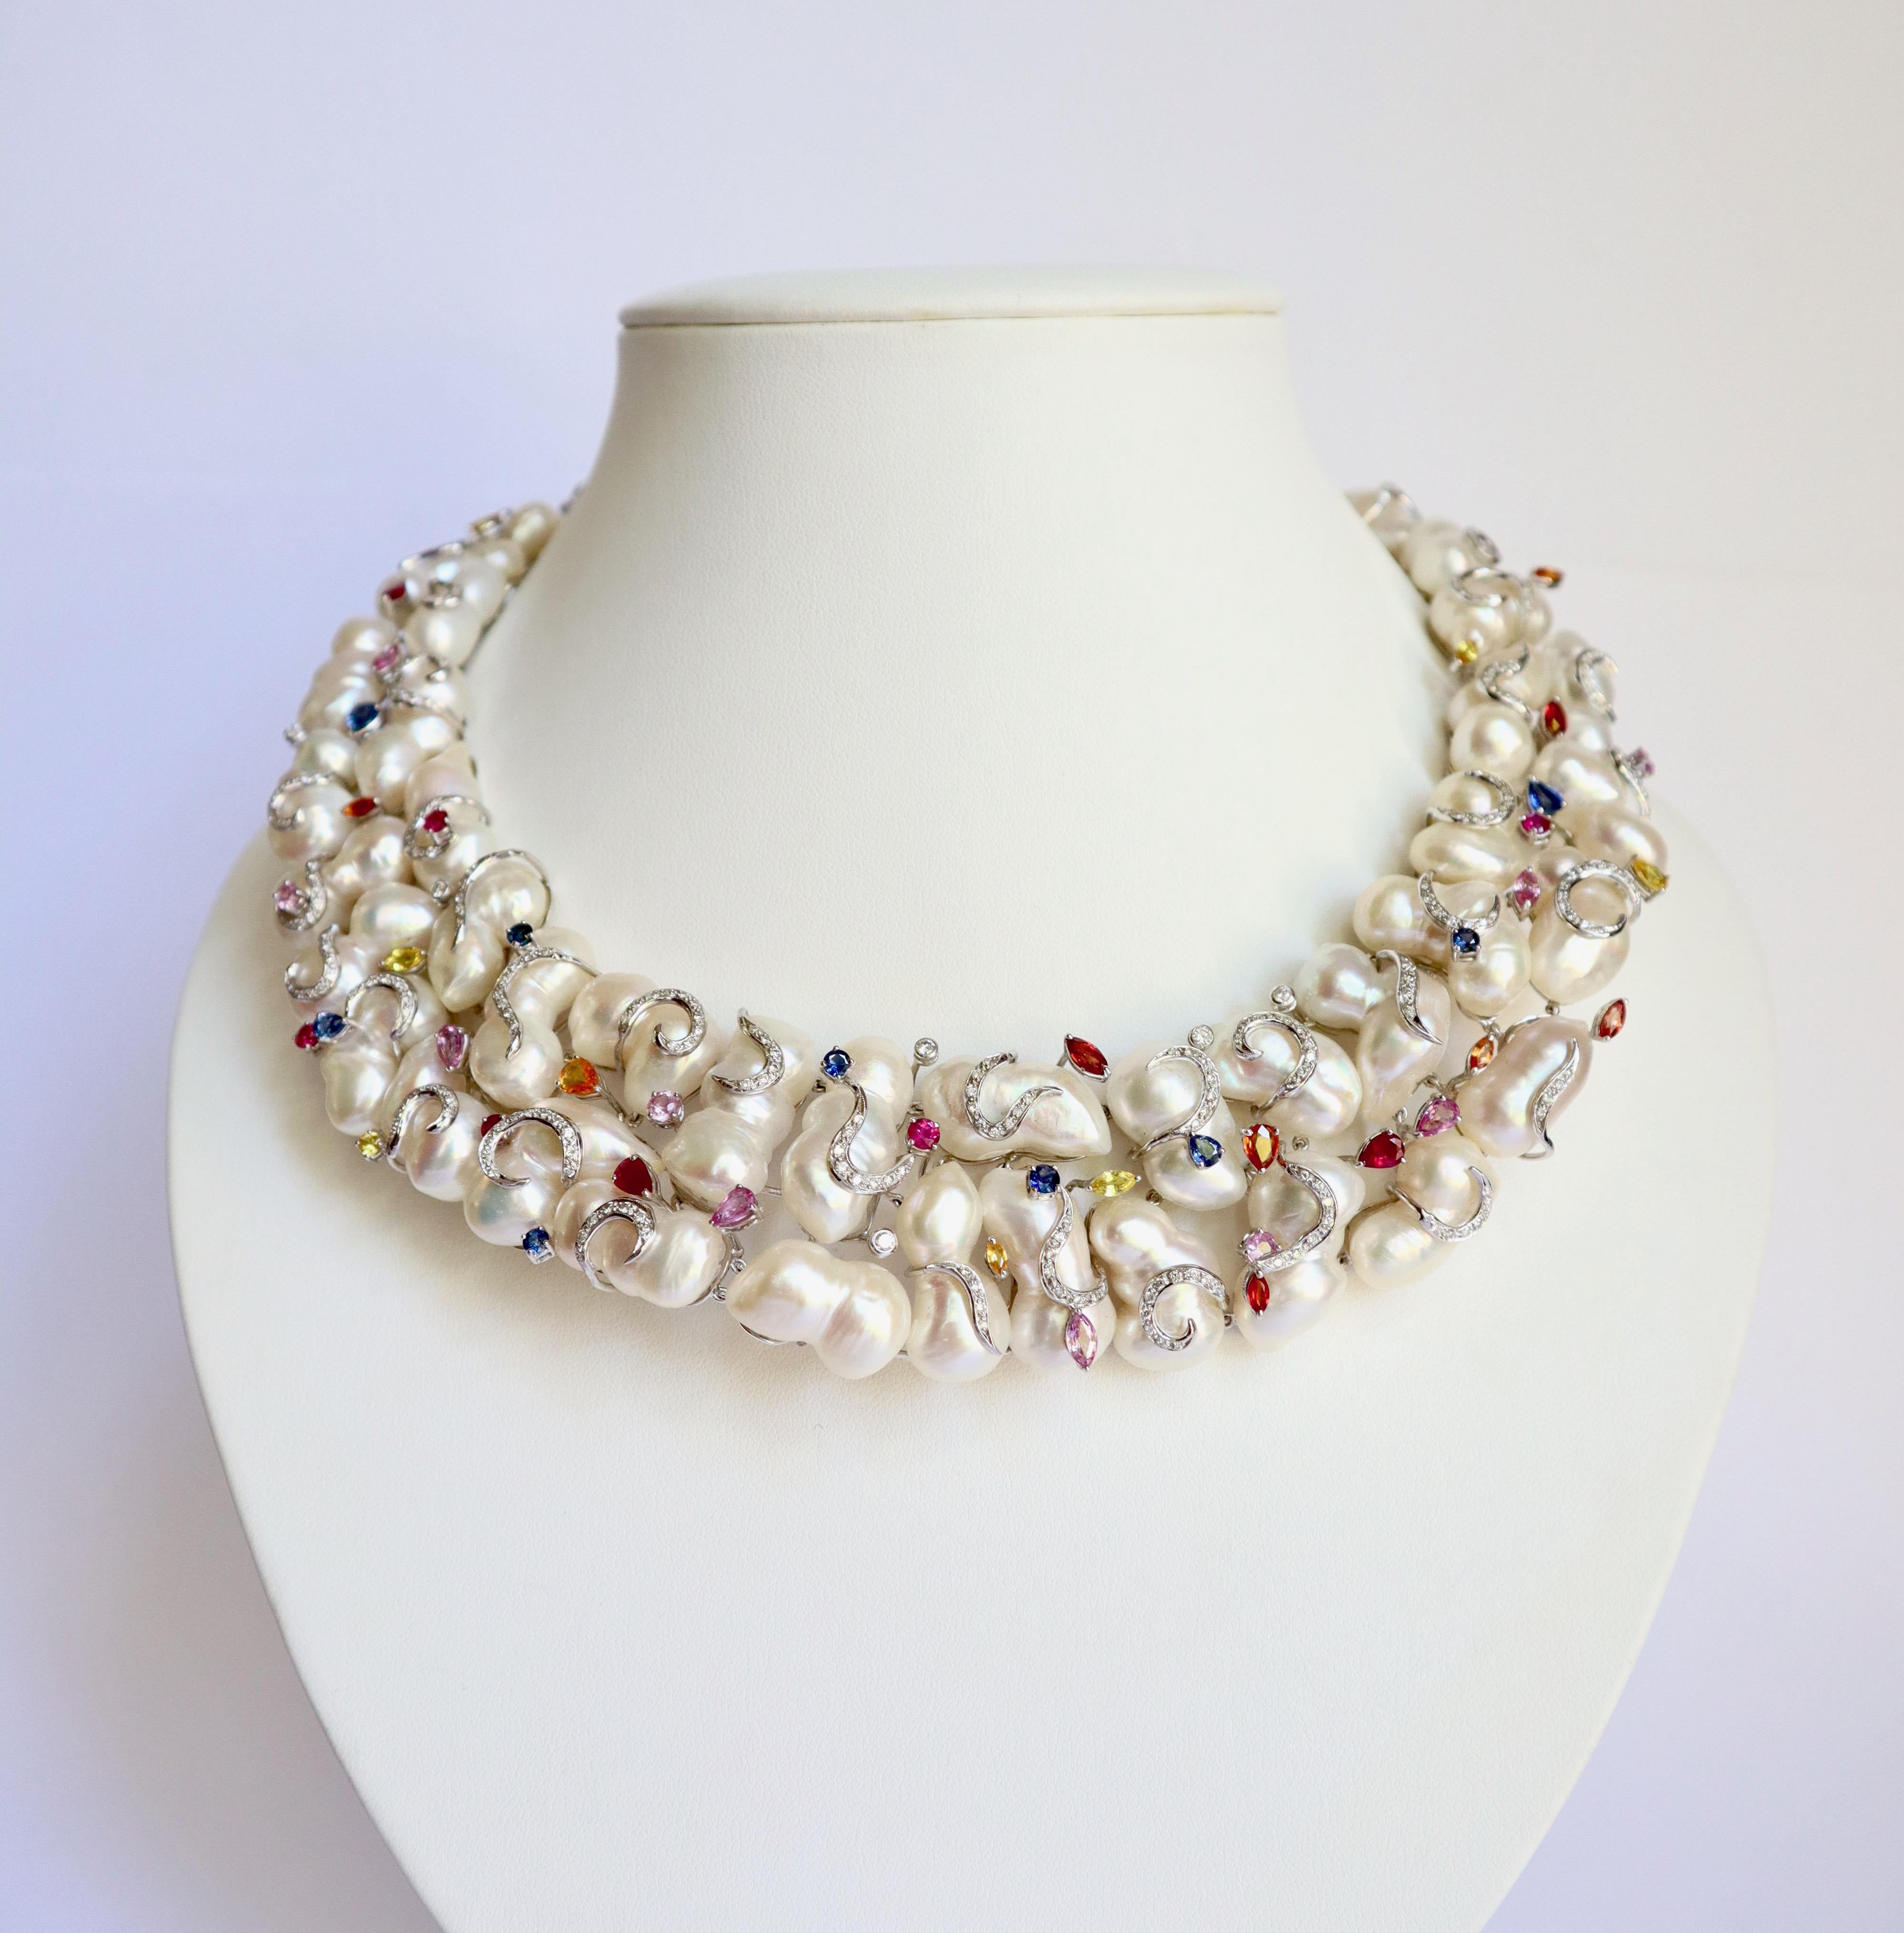 Multicolored sapphire and diamond baroque pearl necklace. 18K white gold setting. It is composed of 45 baroque pearls, 46 multicolored sapphires of various shapes and colors (navettes, pears, rounds) for a total weight of 12.21 carats and 292